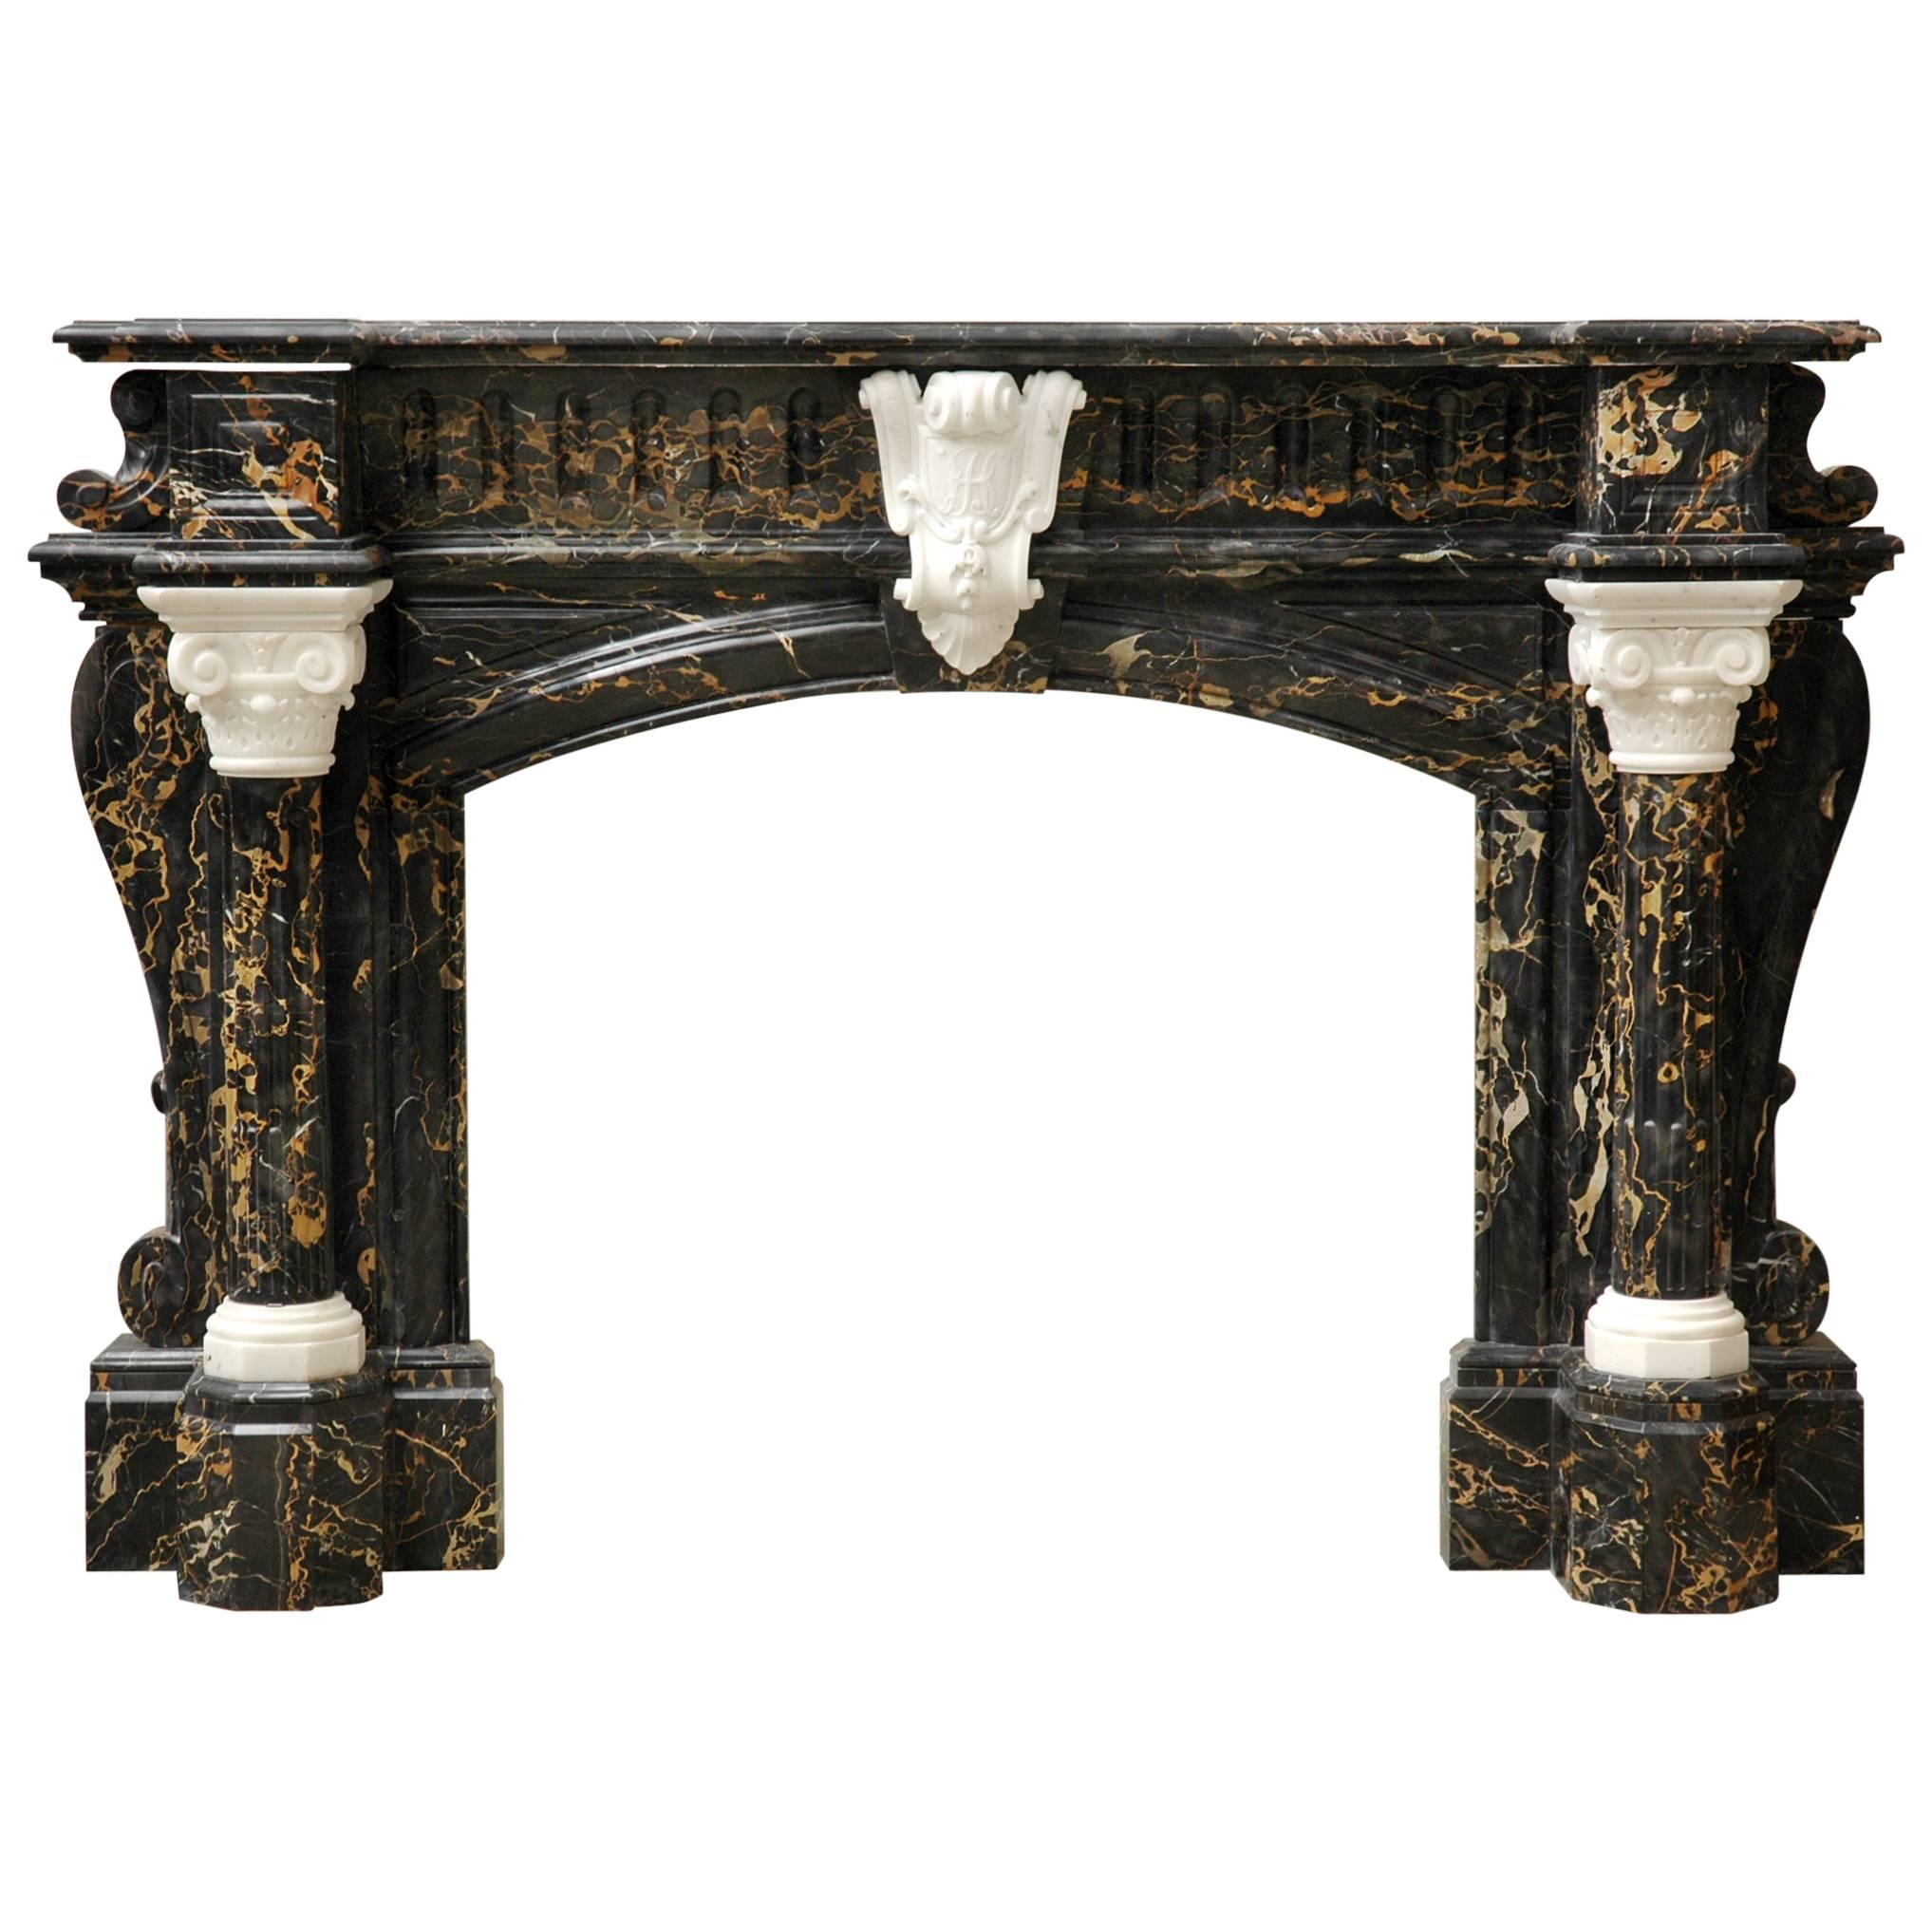 Exceptional Napoleon III Period Fireplace, Portor and Statuary Marble For Sale